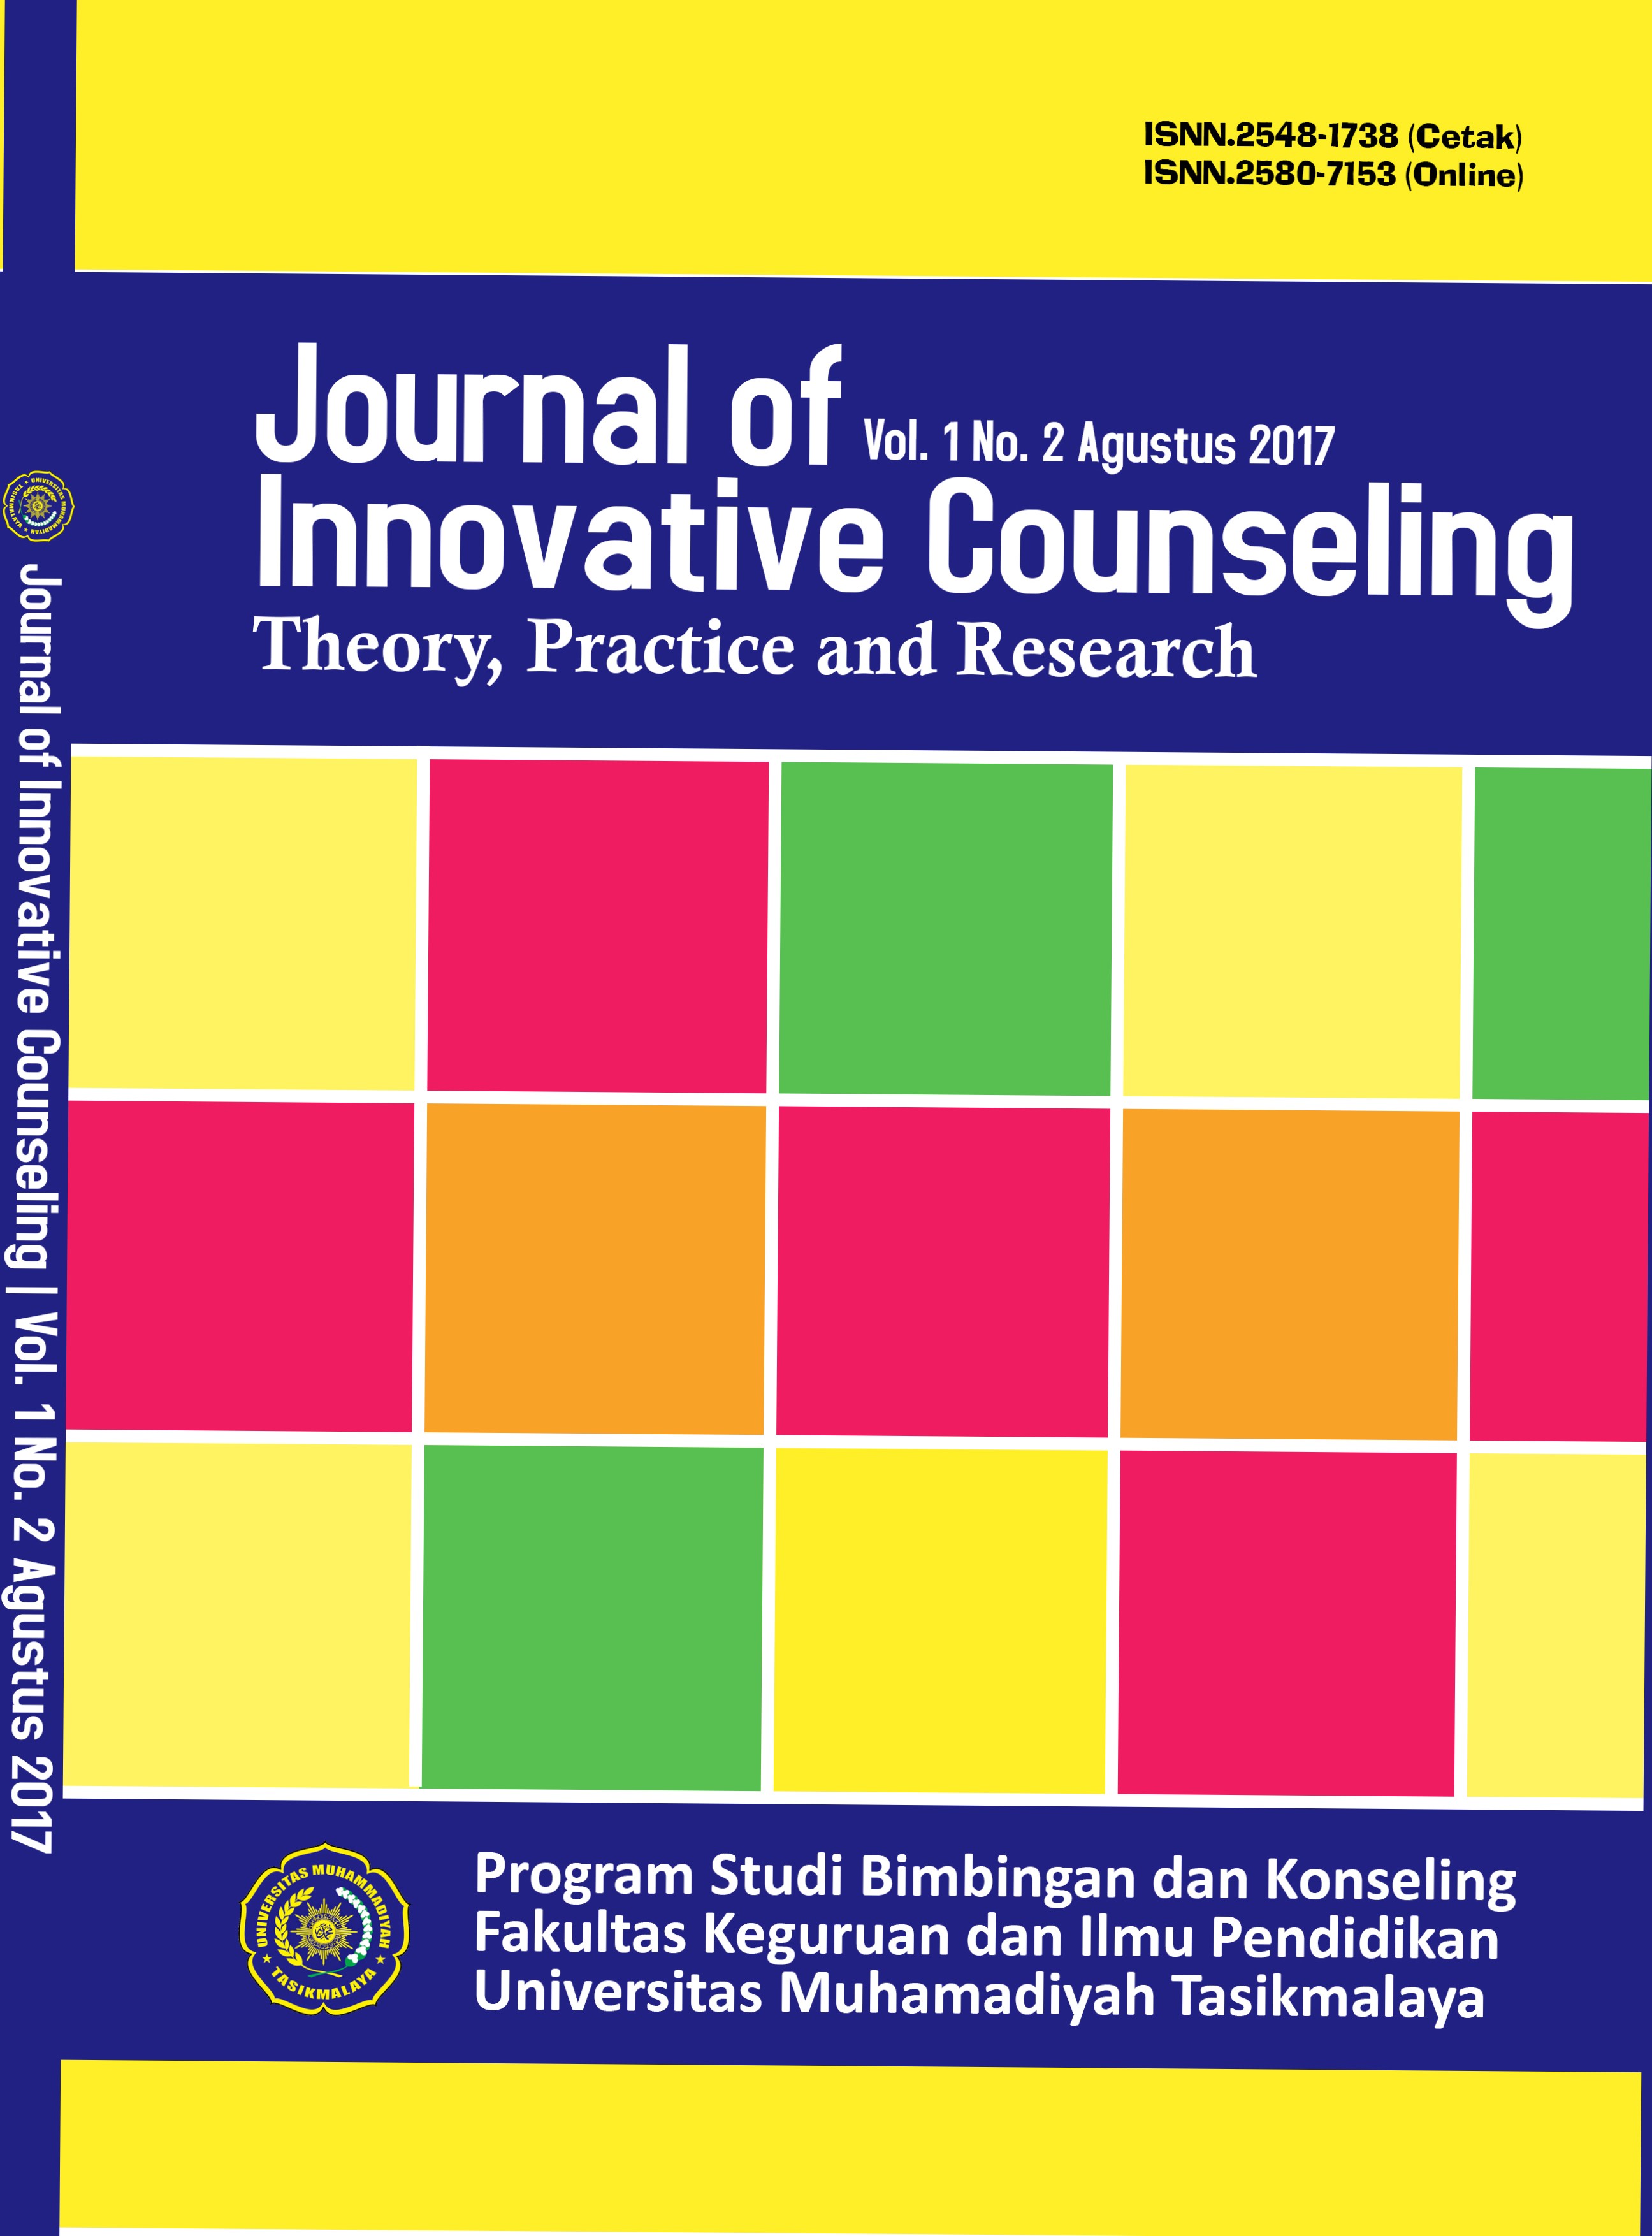 Journal of Innovative Counseling